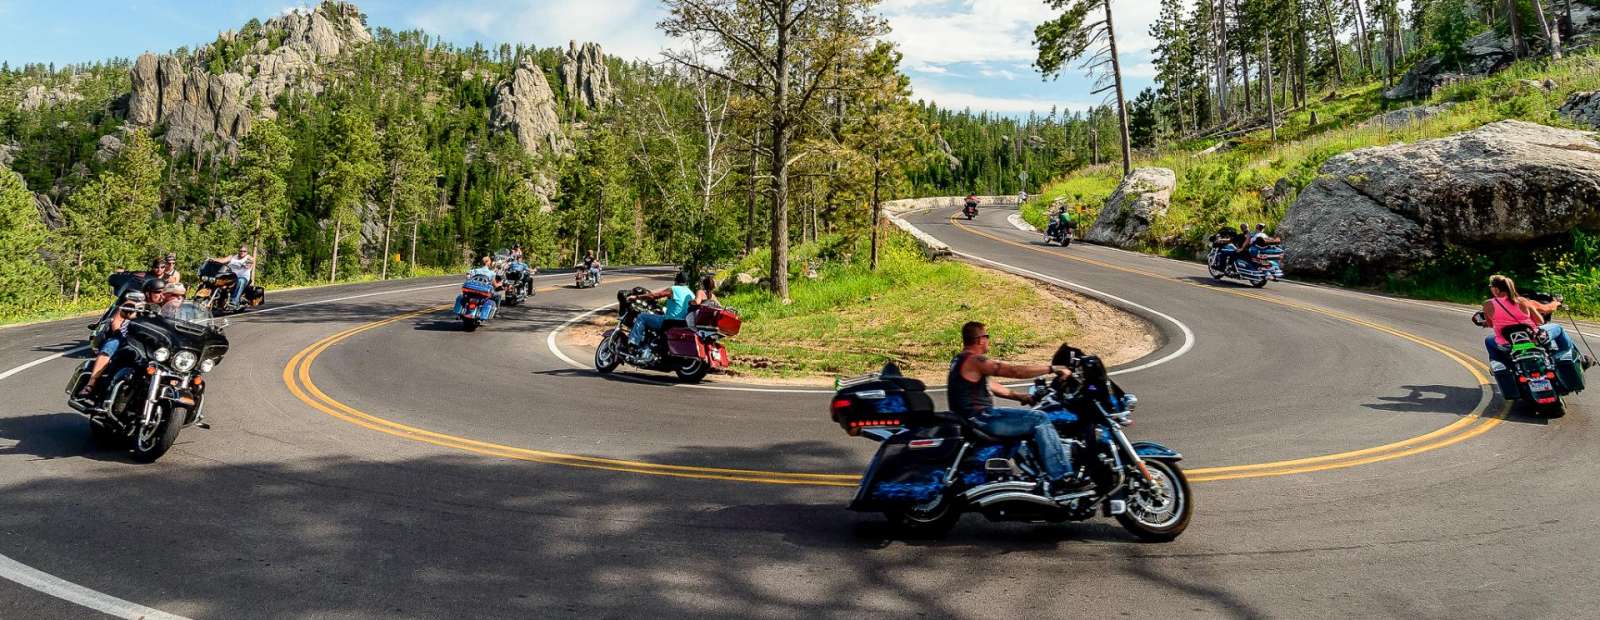 Surviving the Sturgis Rally – Tips if You are Involved in a Motorcycle Accident